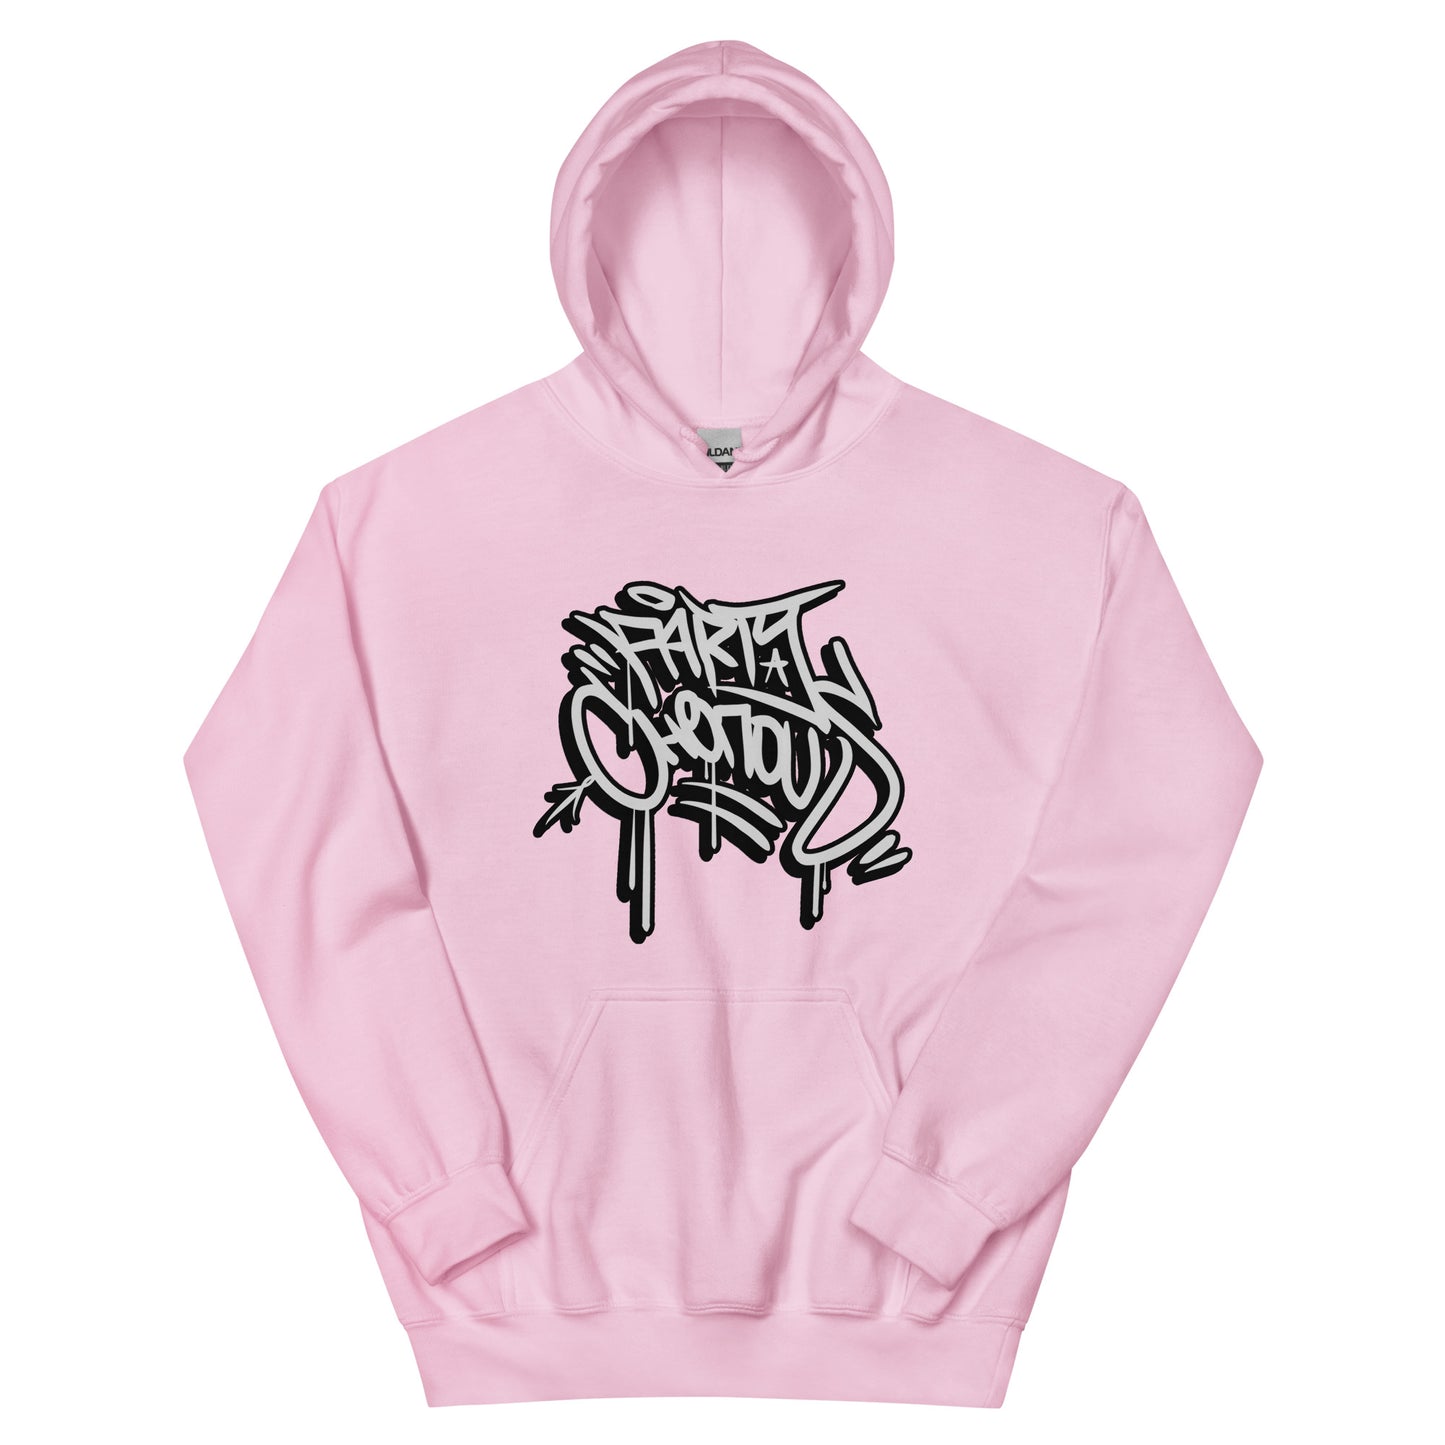 Party Chenous hoodie